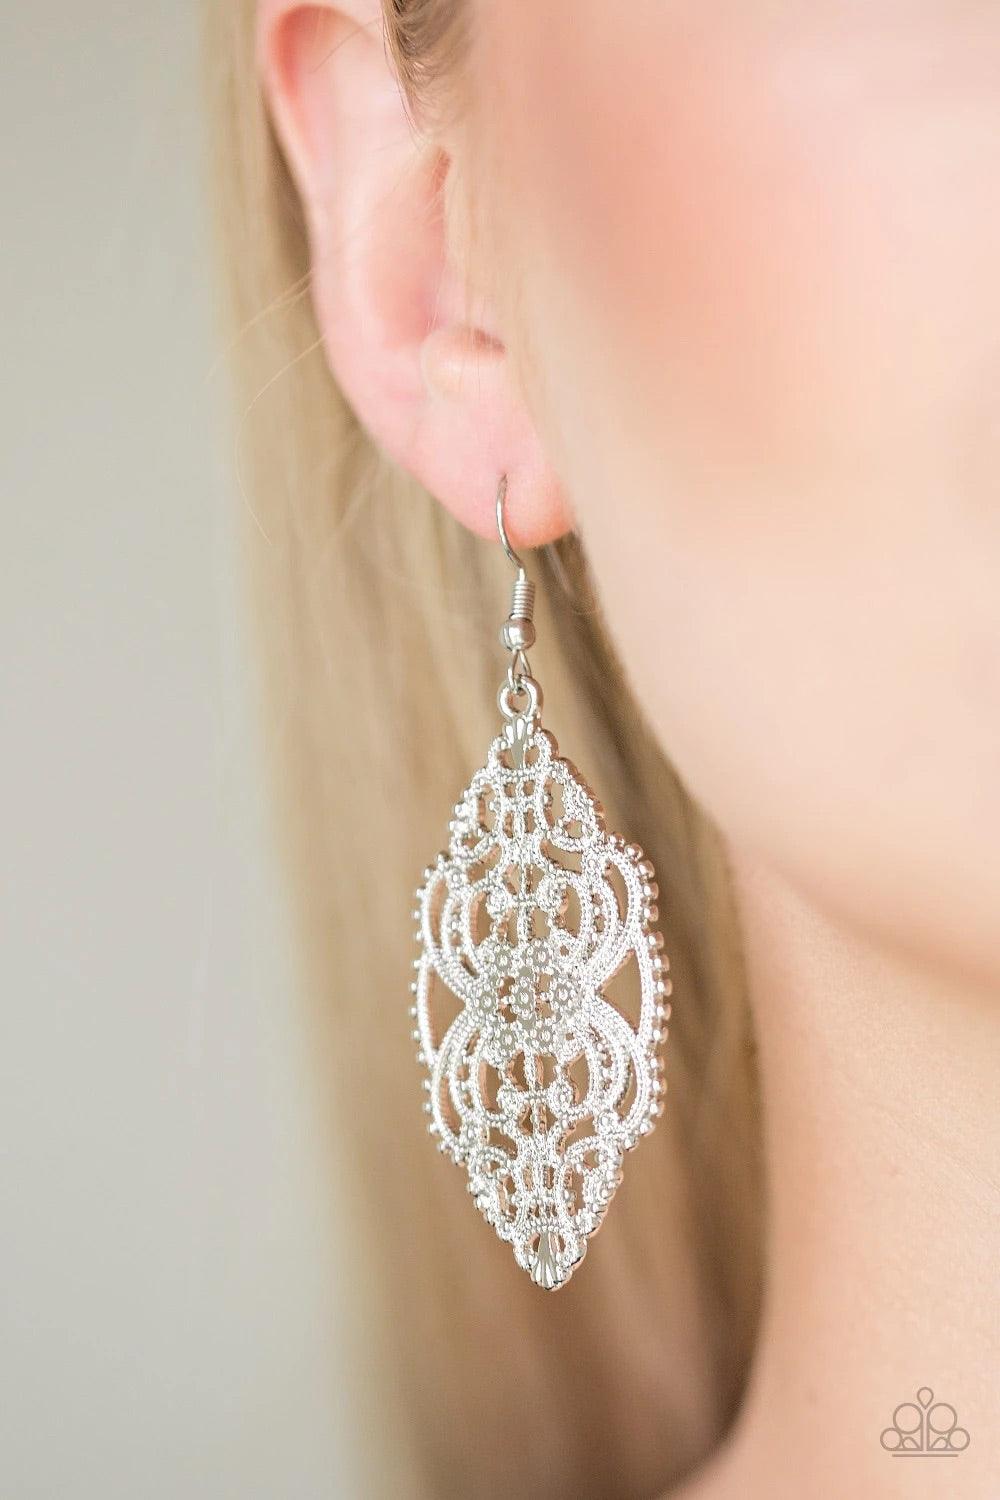 Paparazzi Accessories Ornately Ornate - Silver Brushed in a high-sheen shimmer, dotted silver filigree swoops and swirls into a regal frame. Earring attaches to a standard fishhook fitting. Sold as one pair of earrings. Jewelry